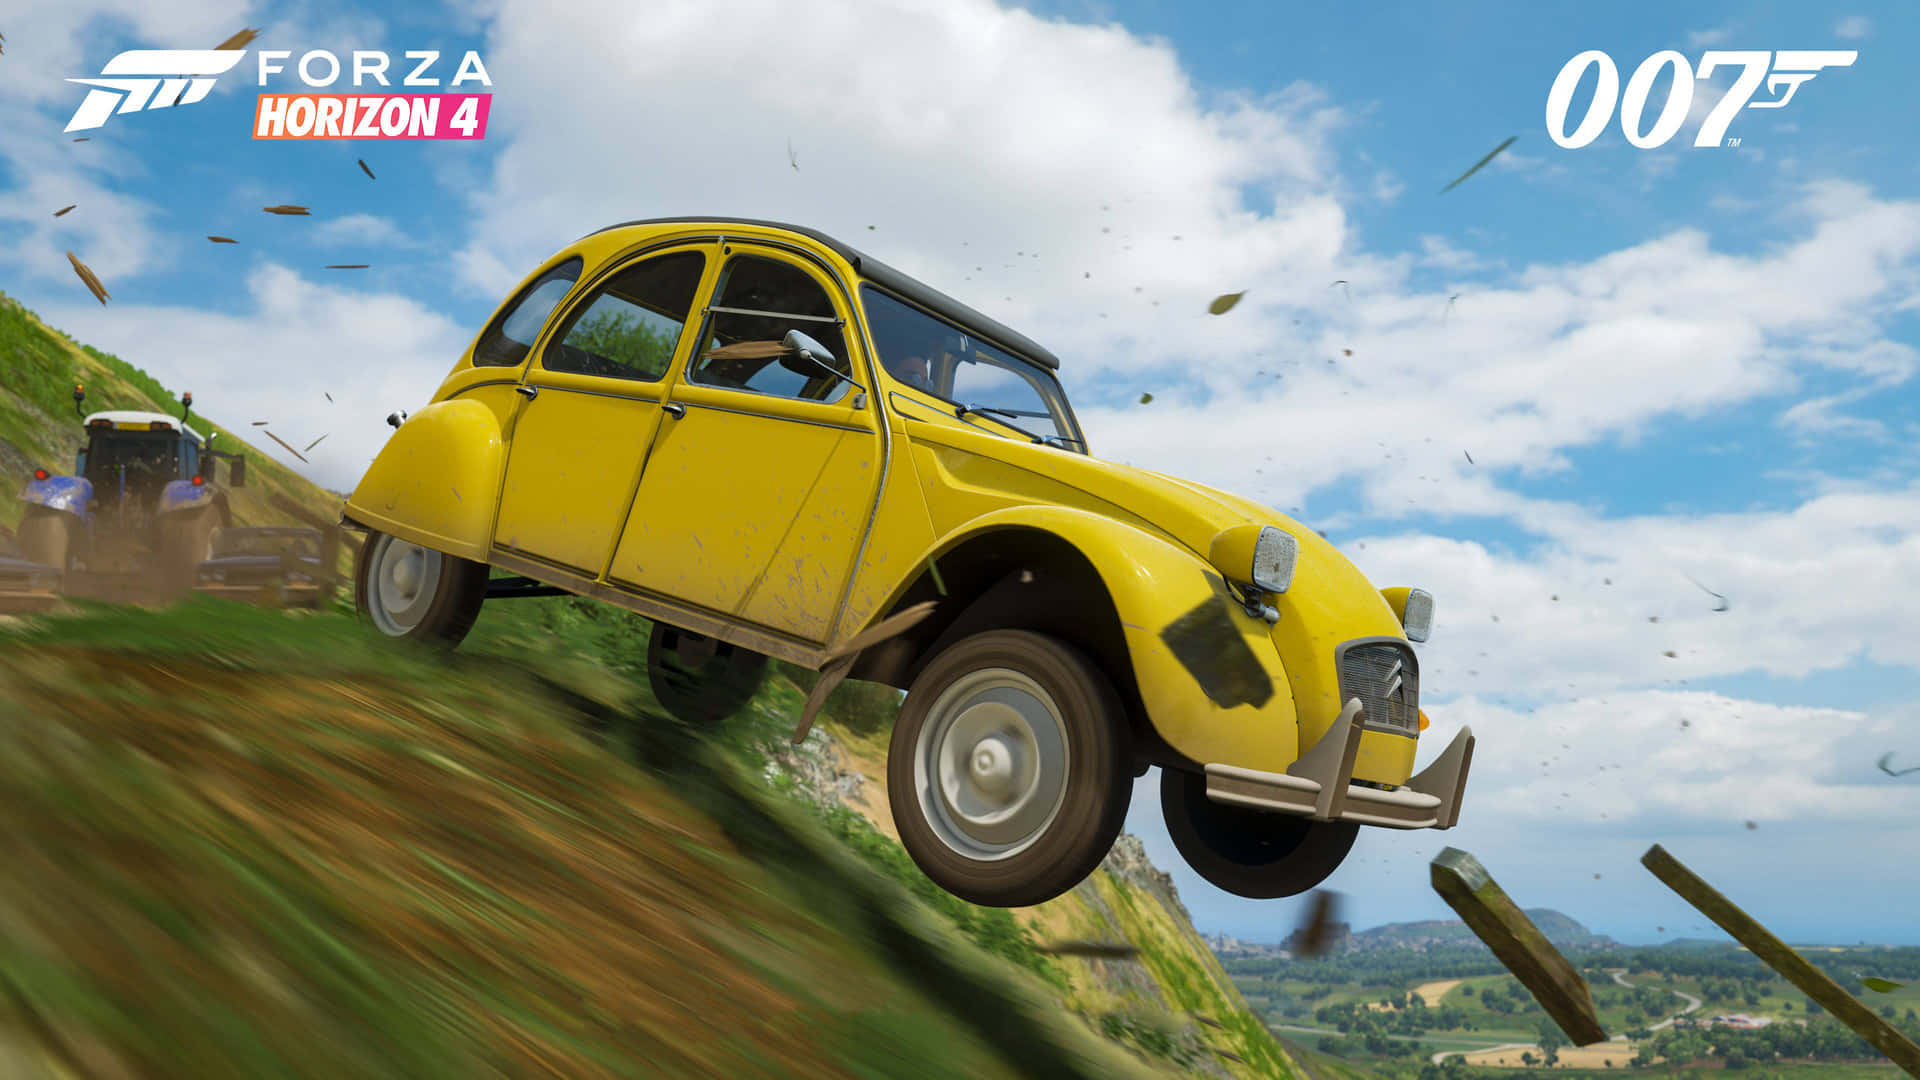 Captivating Forza Horizon 4 Gameplay in High Definition 4K